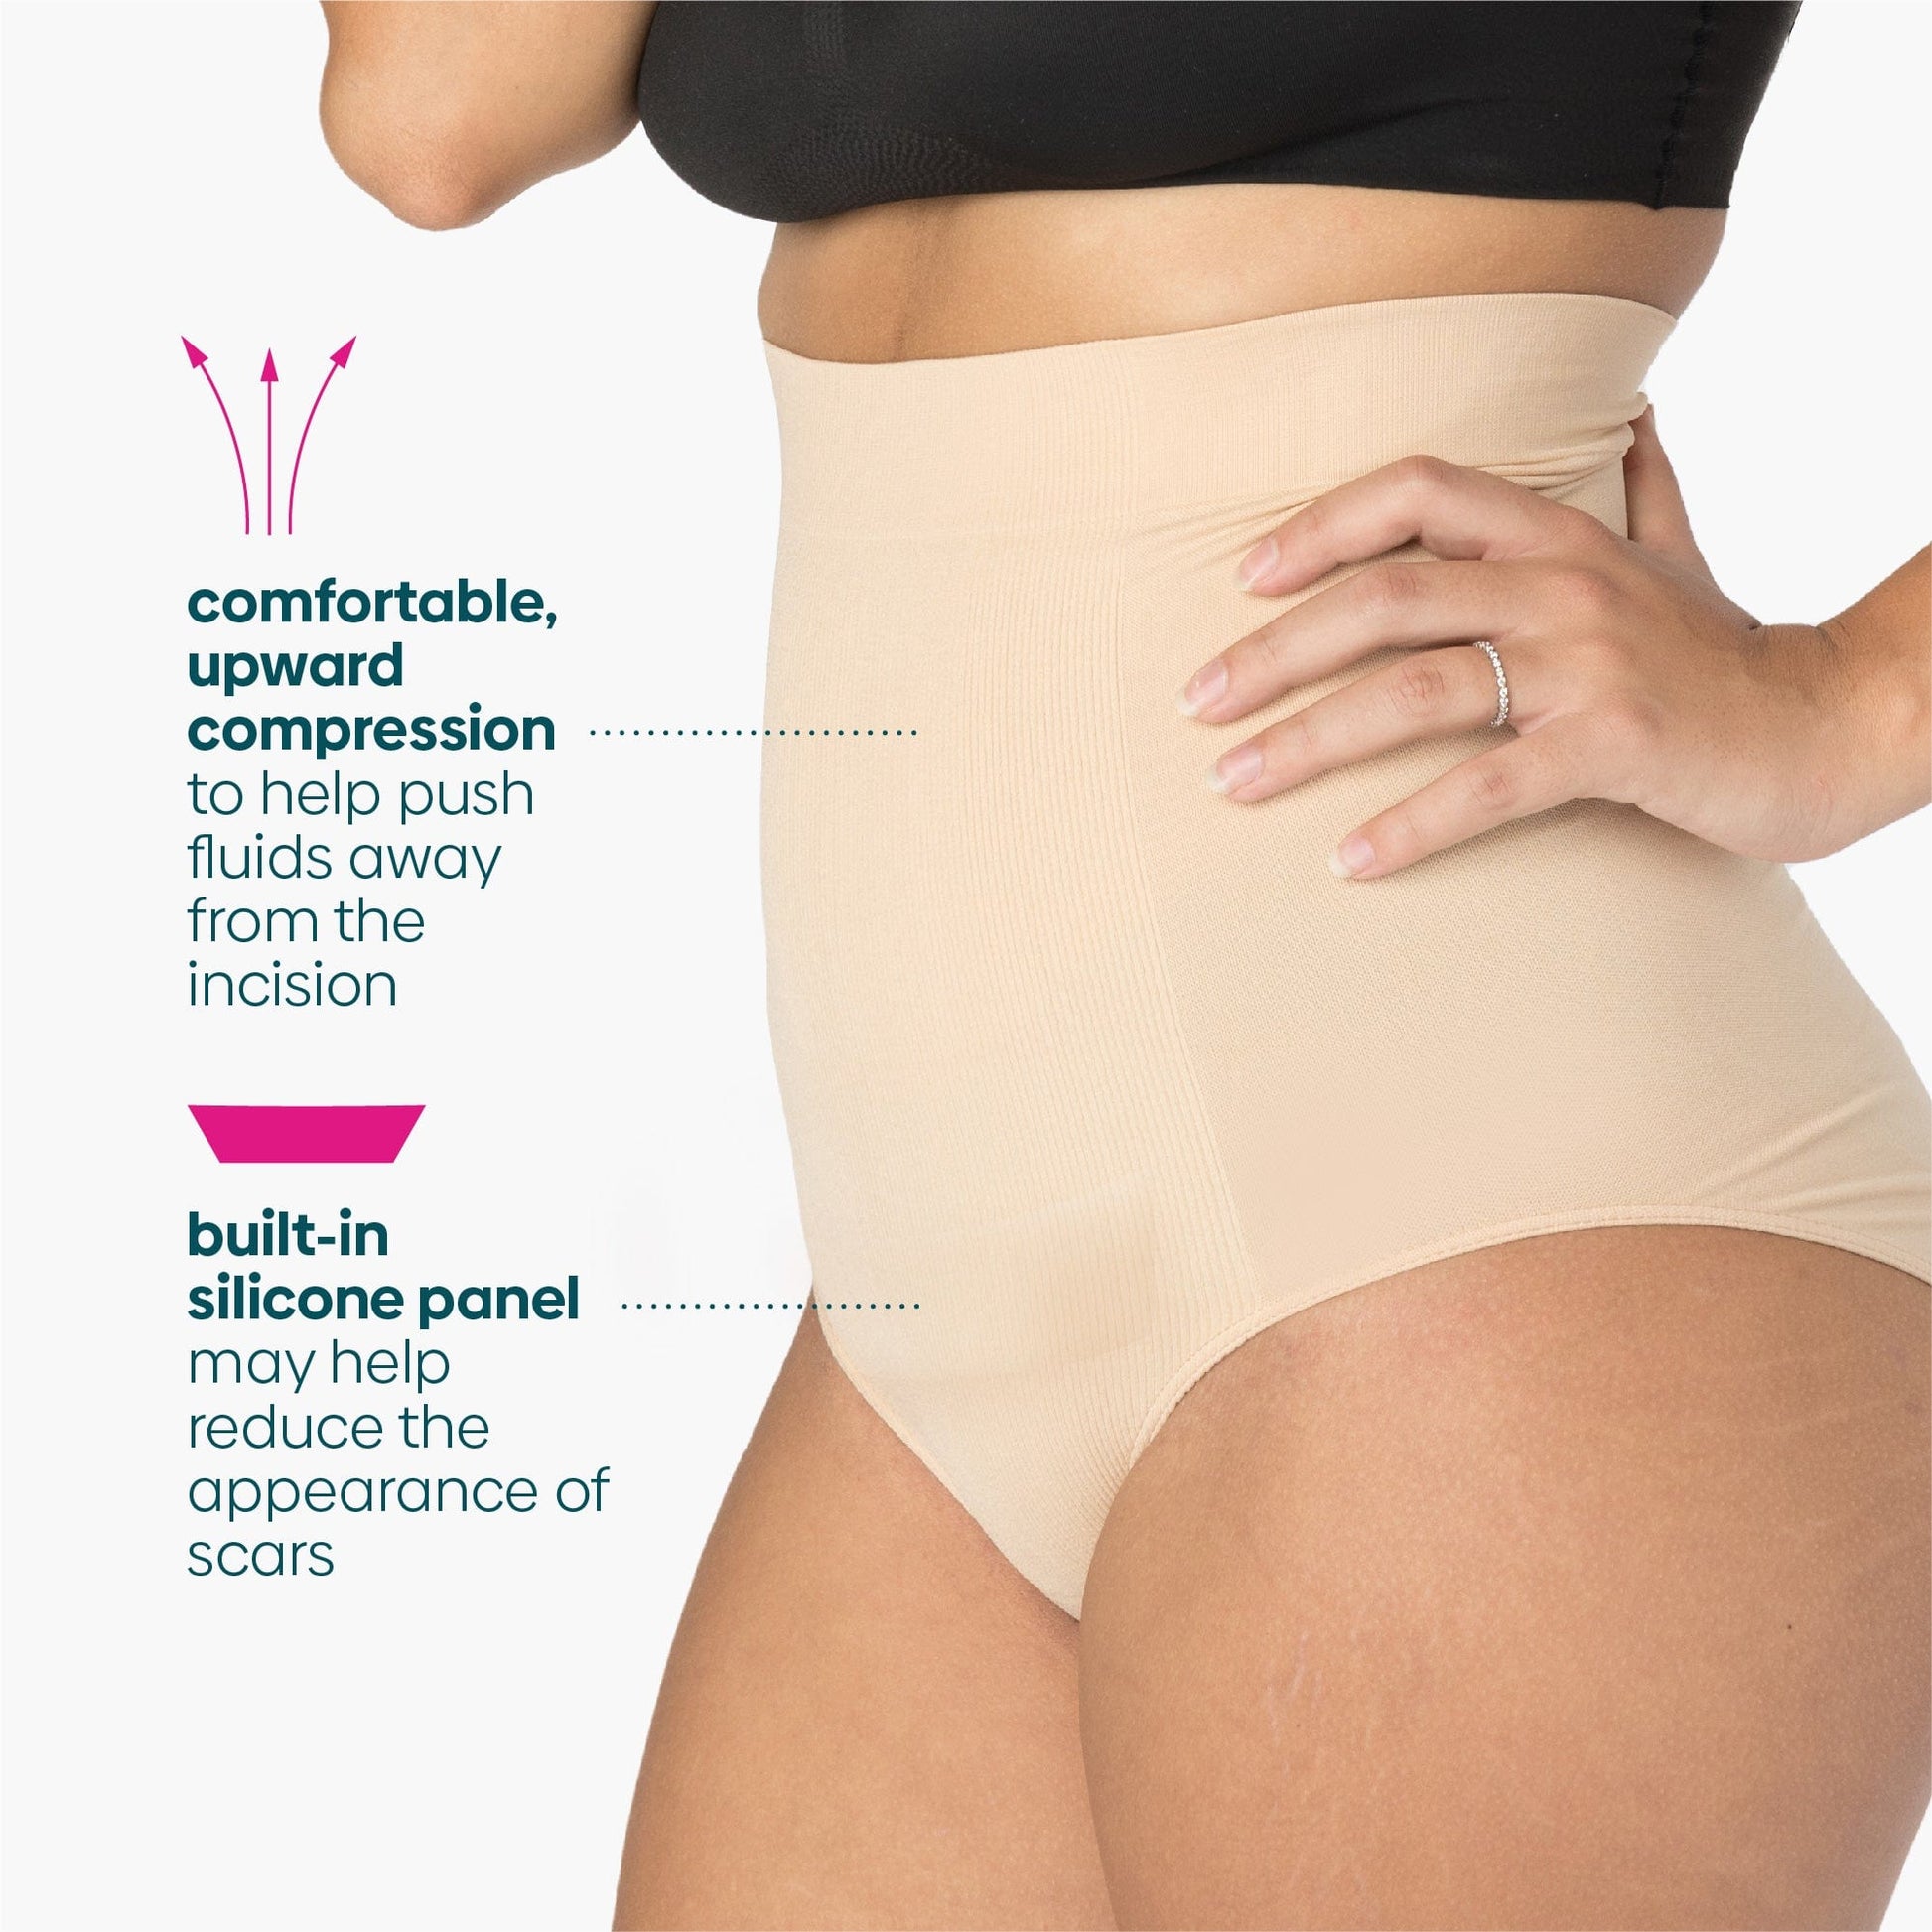 c section compression underwear  UpSpring C-Panty C-Section Recovery  Underwear with Silicone Panel for Incision Care